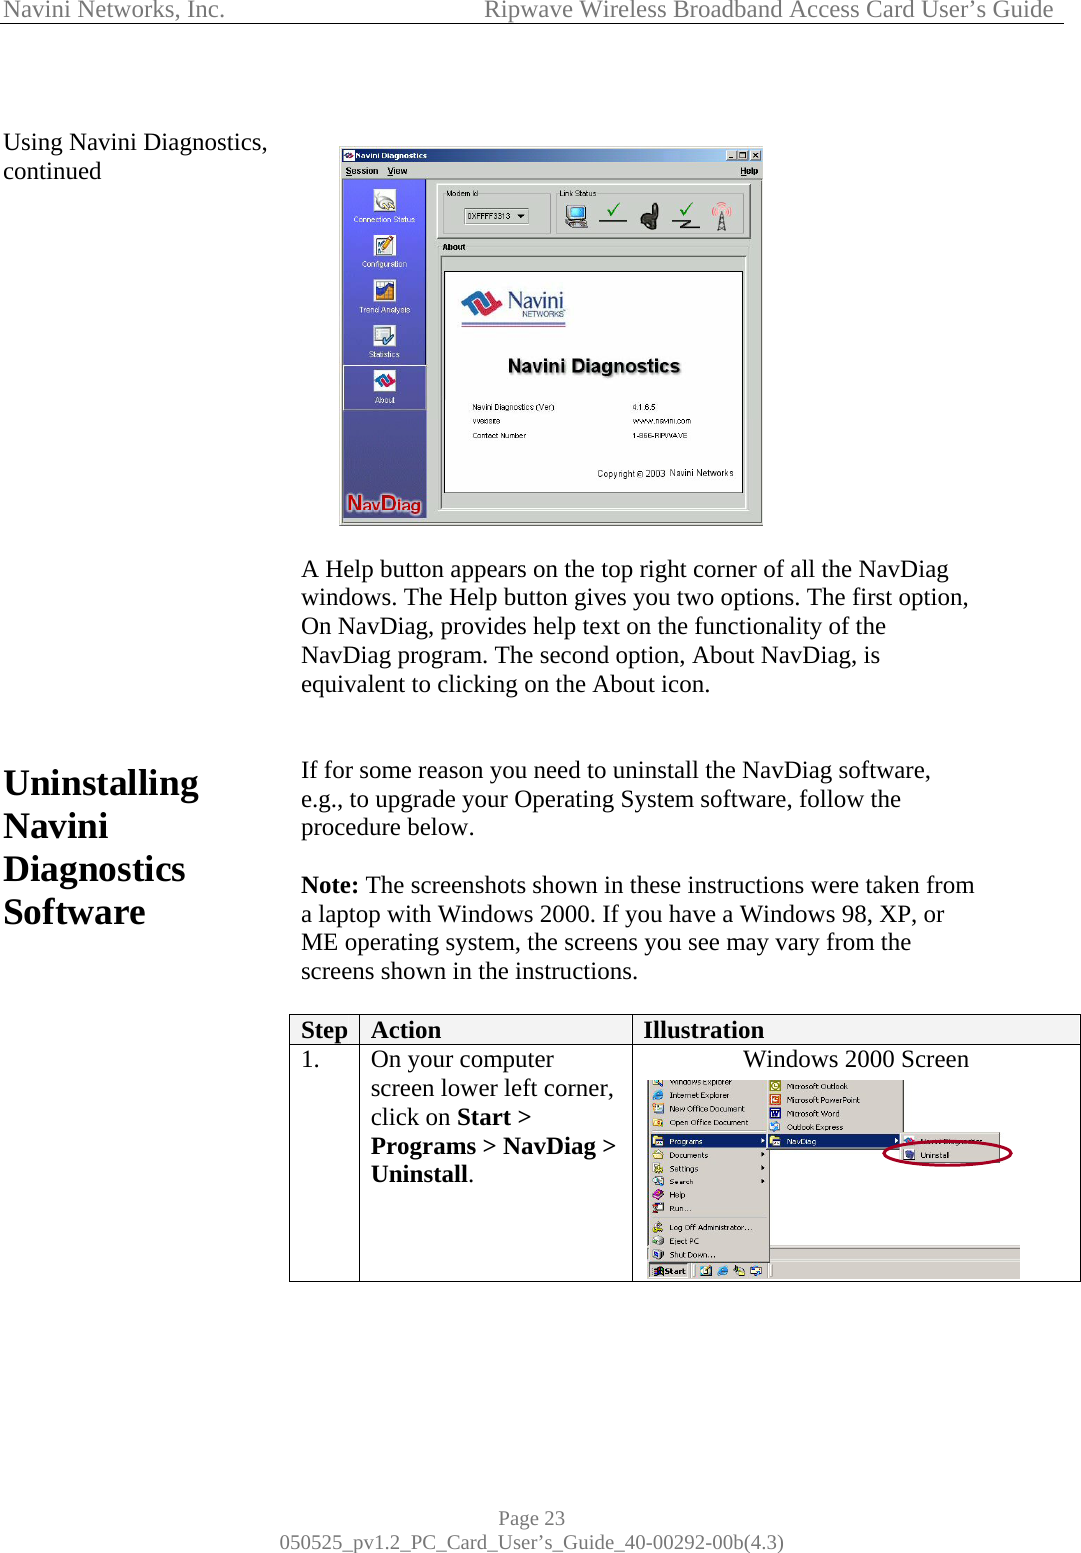 Navini Networks, Inc.            Ripwave Wireless Broadband Access Card User’s Guide Page 23 050525_pv1.2_PC_Card_User’s_Guide_40-00292-00b(4.3)  Using Navini Diagnostics, continued                     Uninstalling Navini Diagnostics Software                    A Help button appears on the top right corner of all the NavDiag windows. The Help button gives you two options. The first option, On NavDiag, provides help text on the functionality of the NavDiag program. The second option, About NavDiag, is equivalent to clicking on the About icon.   If for some reason you need to uninstall the NavDiag software, e.g., to upgrade your Operating System software, follow the procedure below.  Note: The screenshots shown in these instructions were taken from a laptop with Windows 2000. If you have a Windows 98, XP, or ME operating system, the screens you see may vary from the screens shown in the instructions.  Step  Action  Illustration 1.  On your computer screen lower left corner, click on Start &gt; Programs &gt; NavDiag &gt; Uninstall. Windows 2000 Screen    